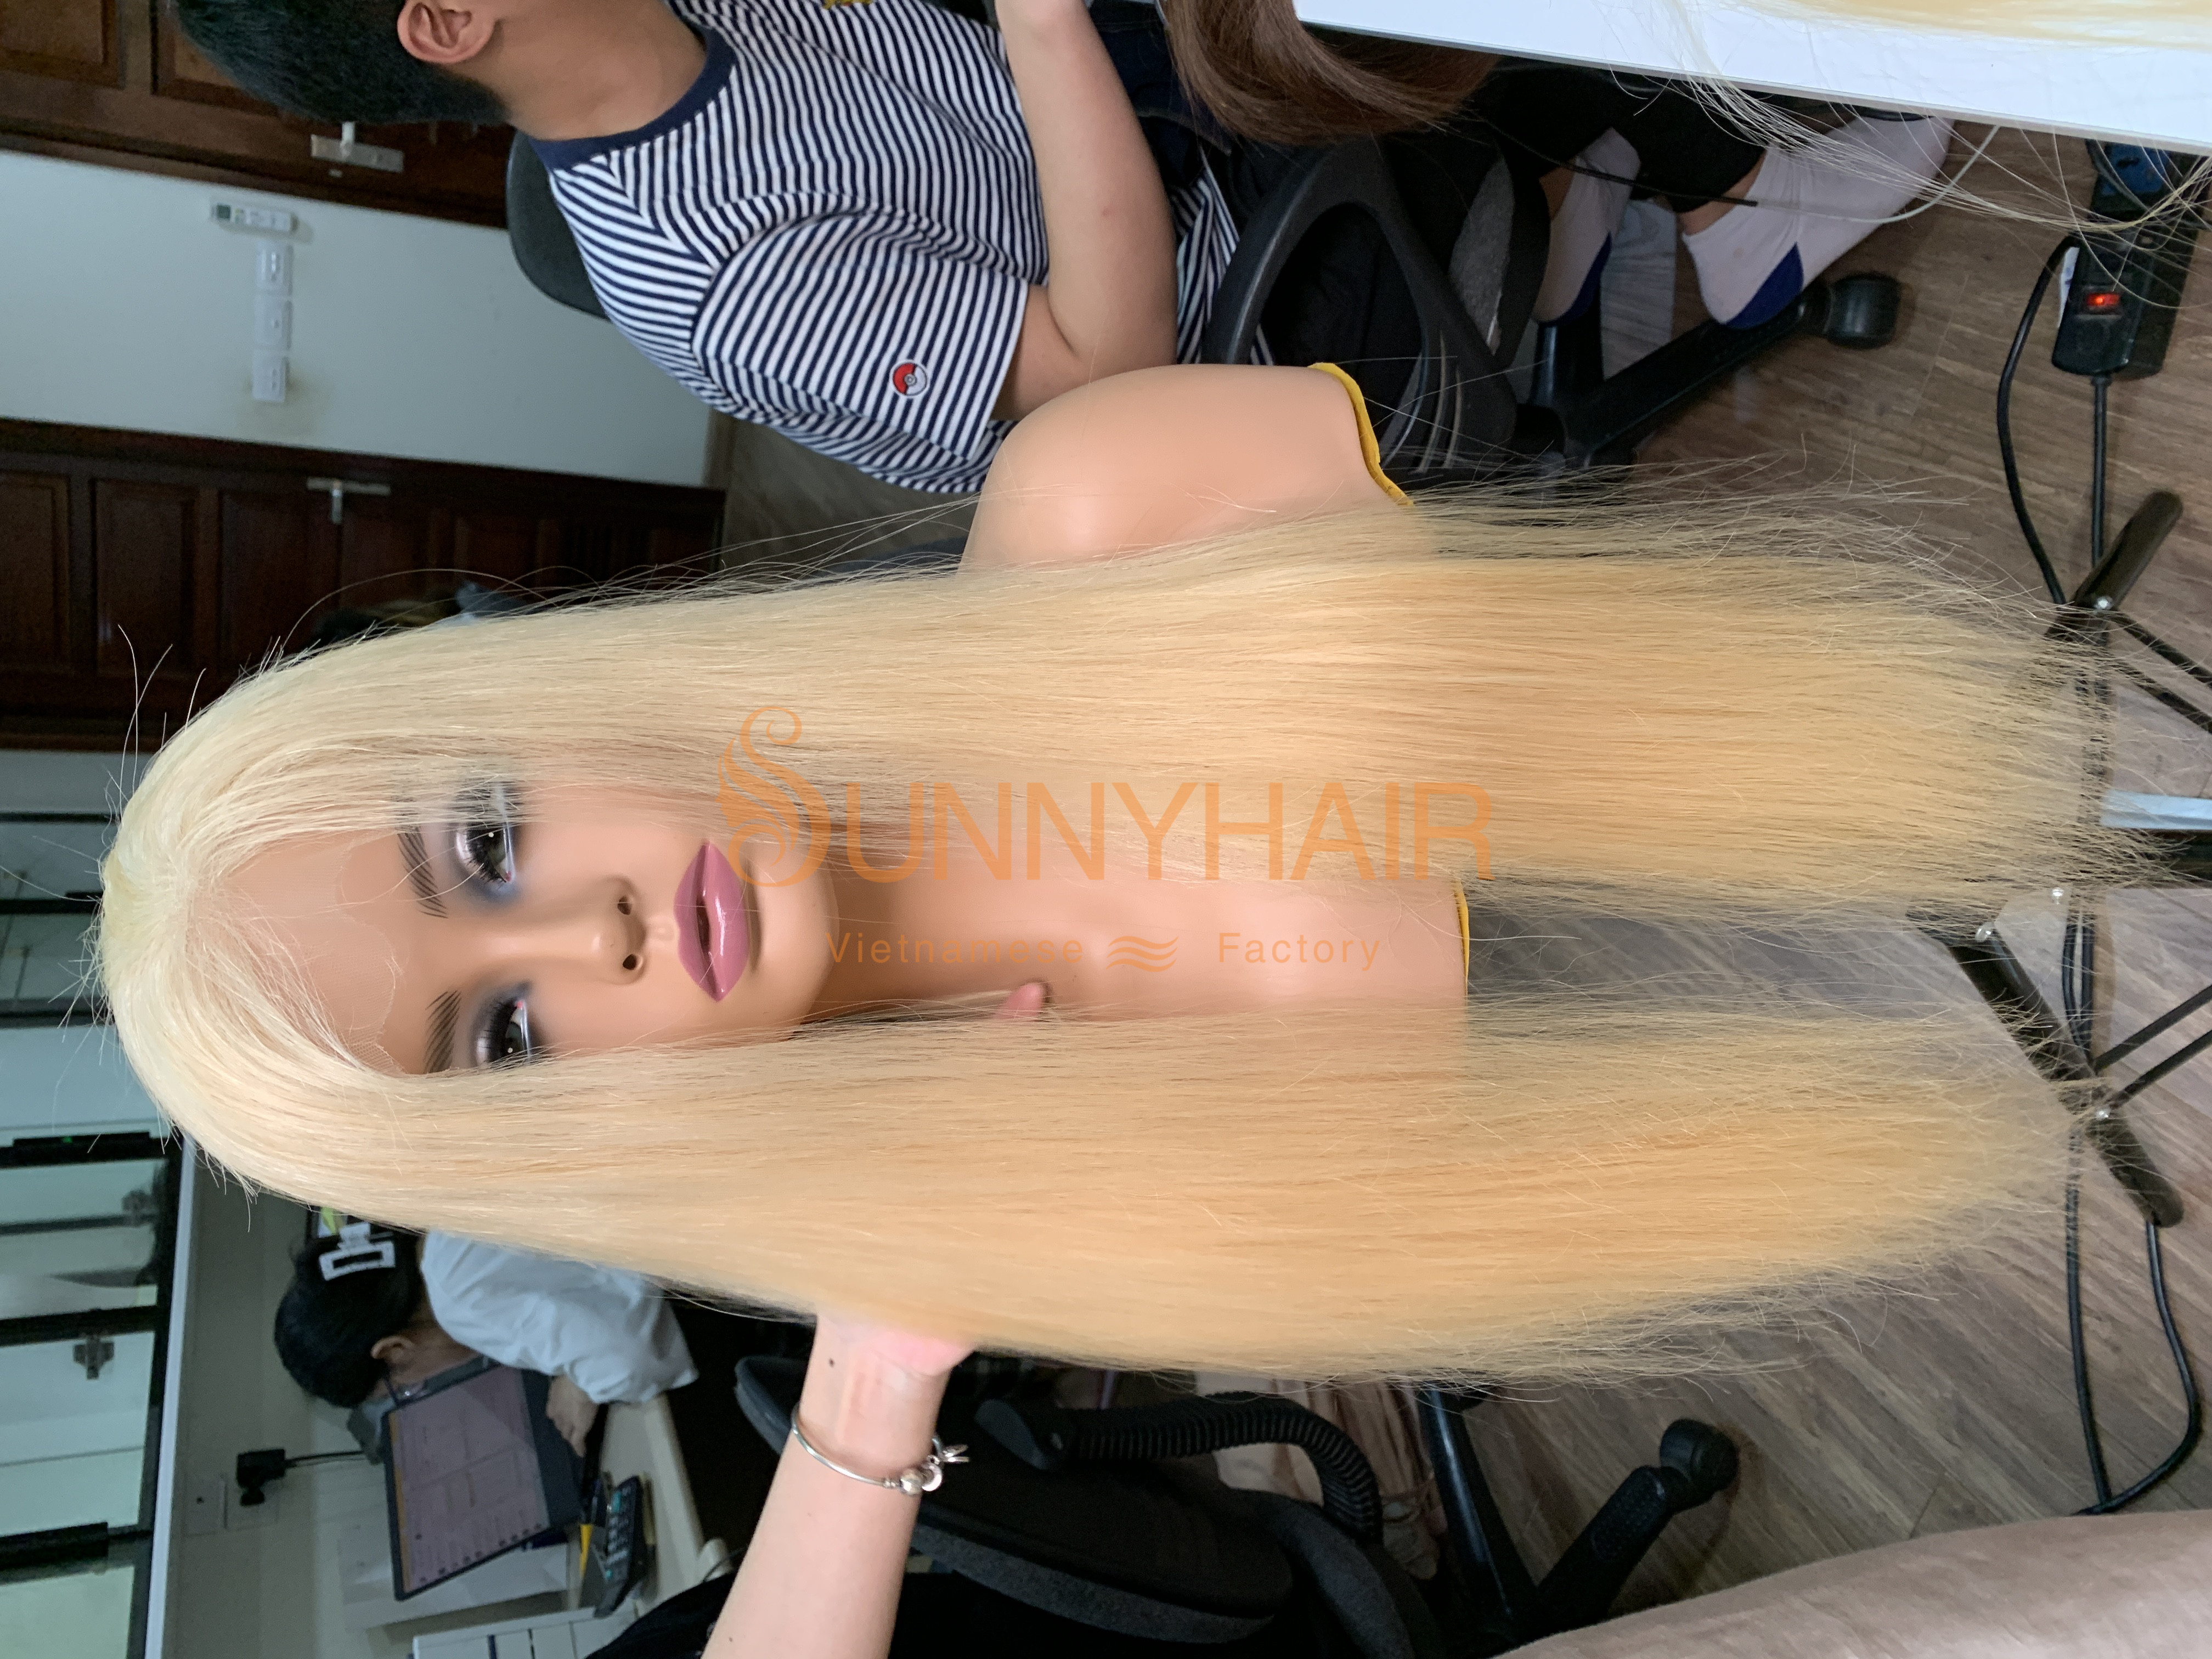 Premium Full Lace Wig Various Styles & Colors & Lengths Human Hair | Vietnam Wig Manufacturer